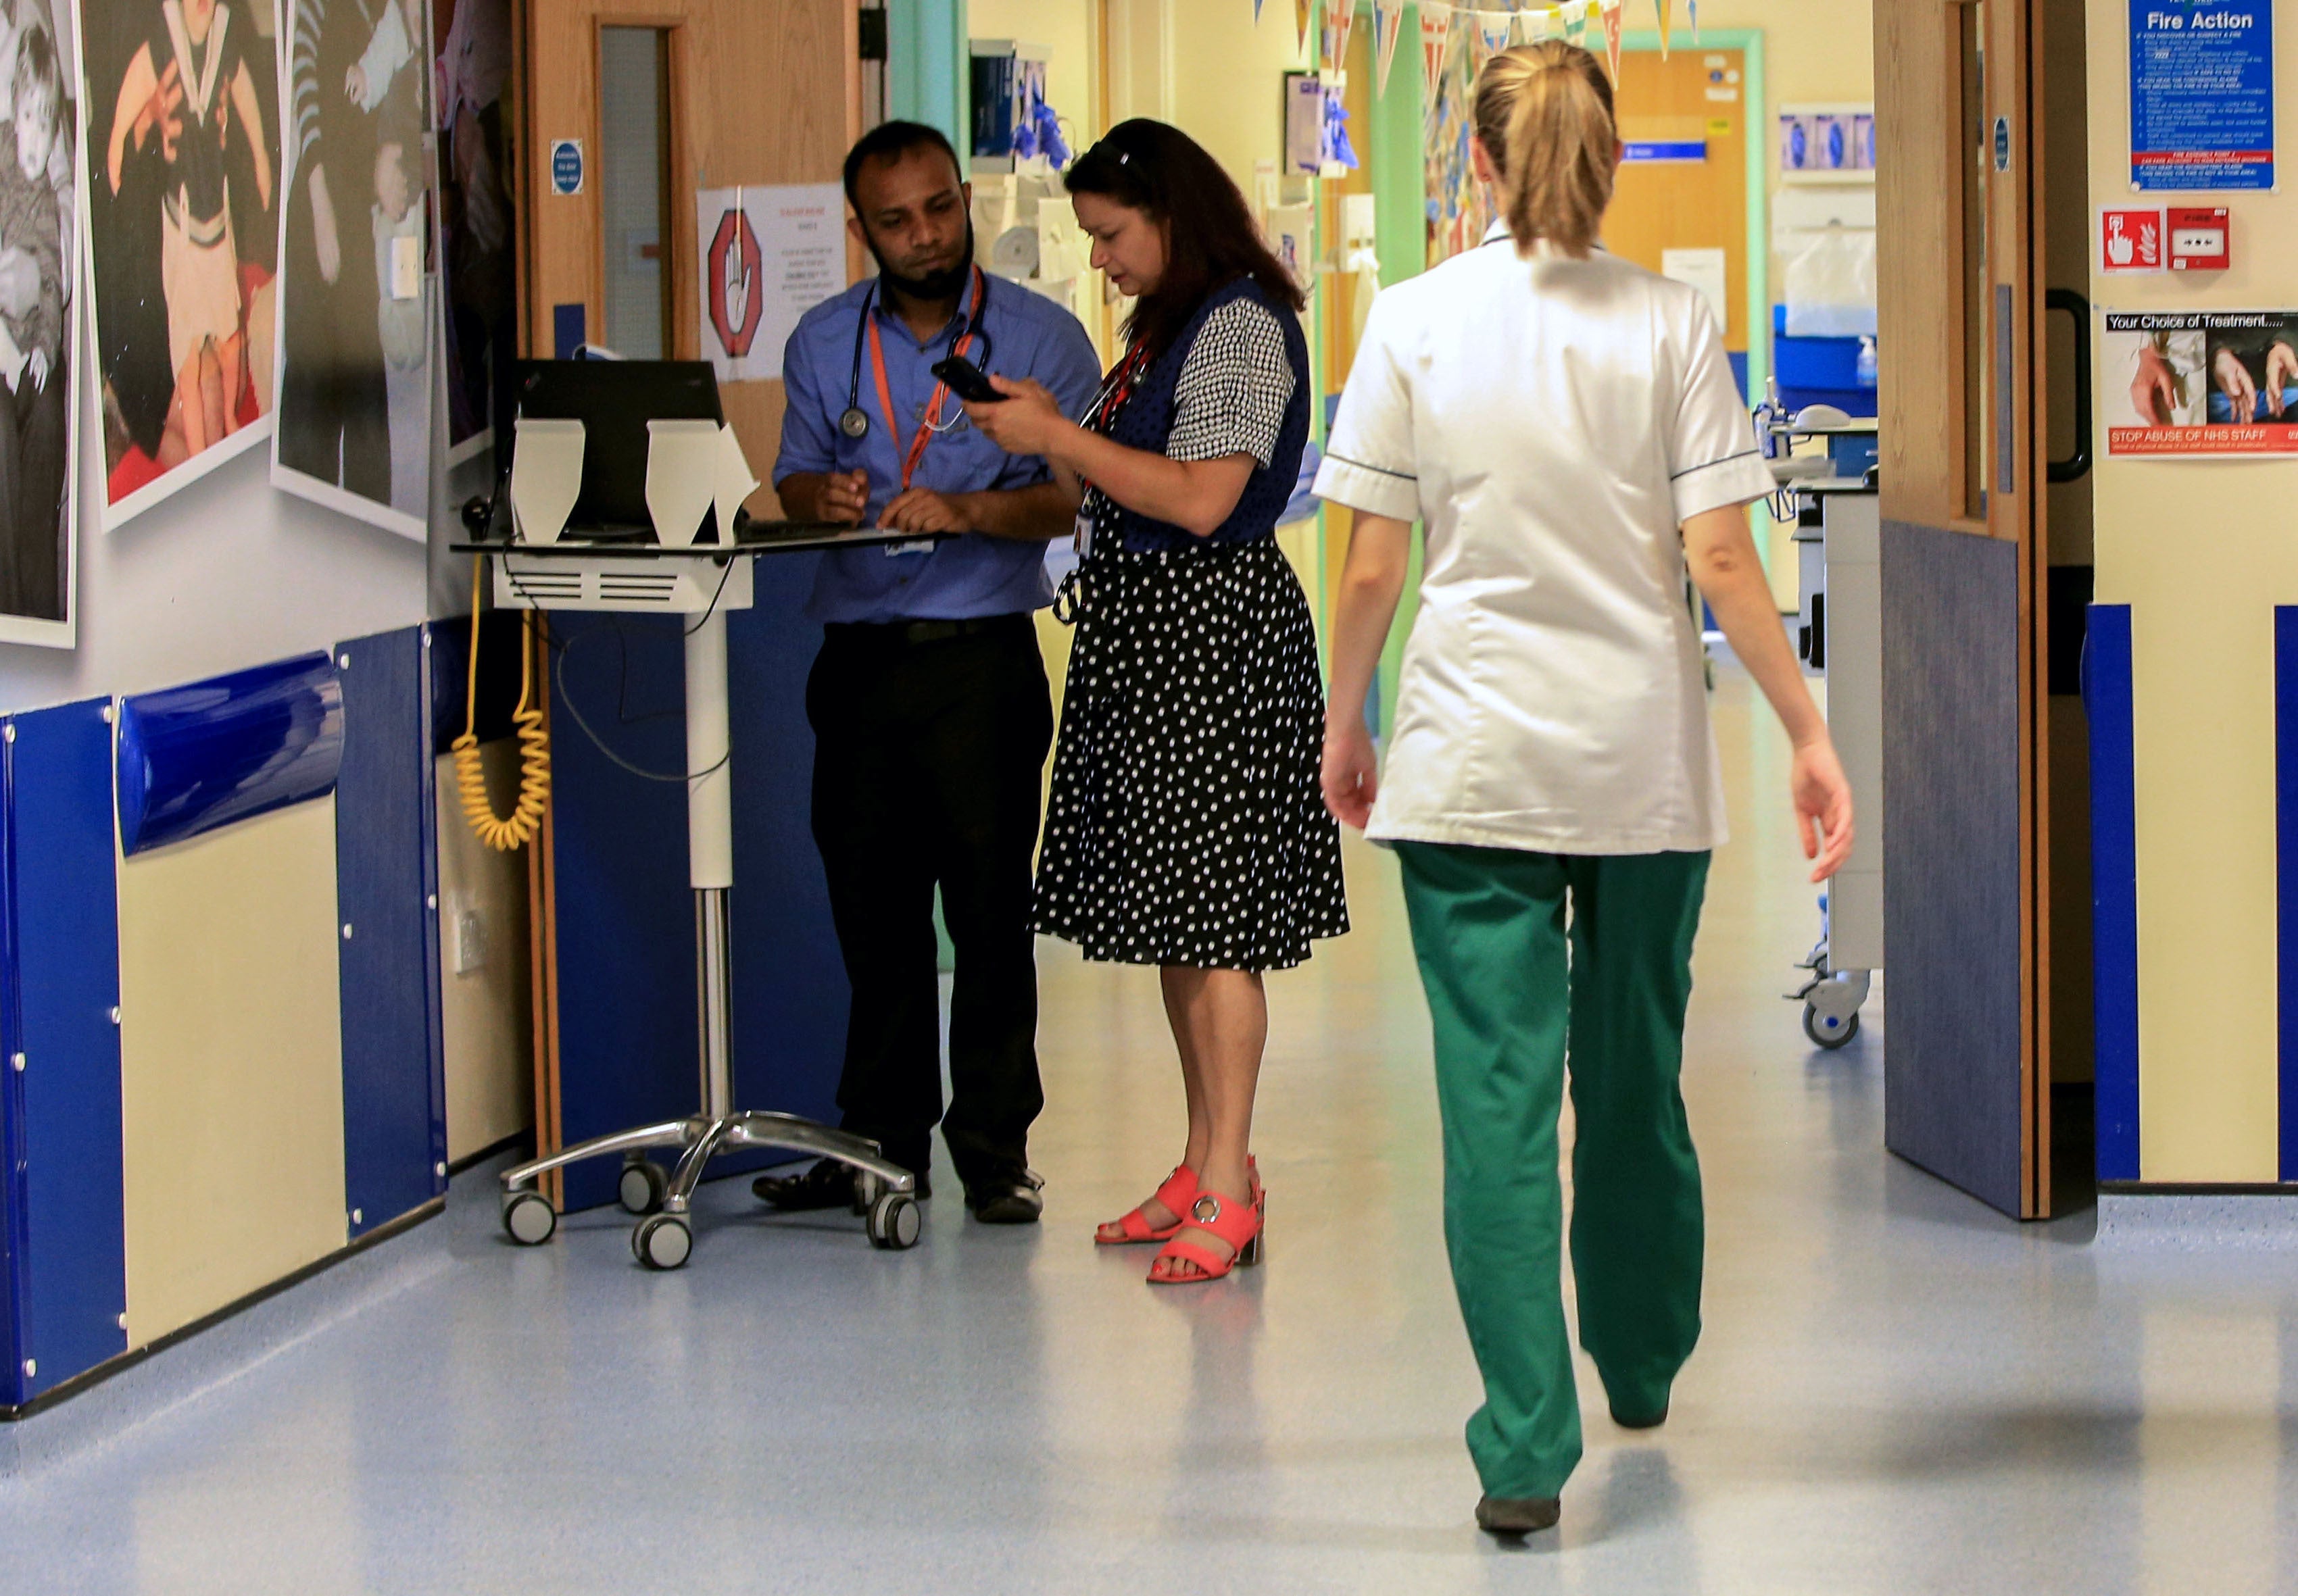 The NHS in England is under pressure as a result of the pandemic